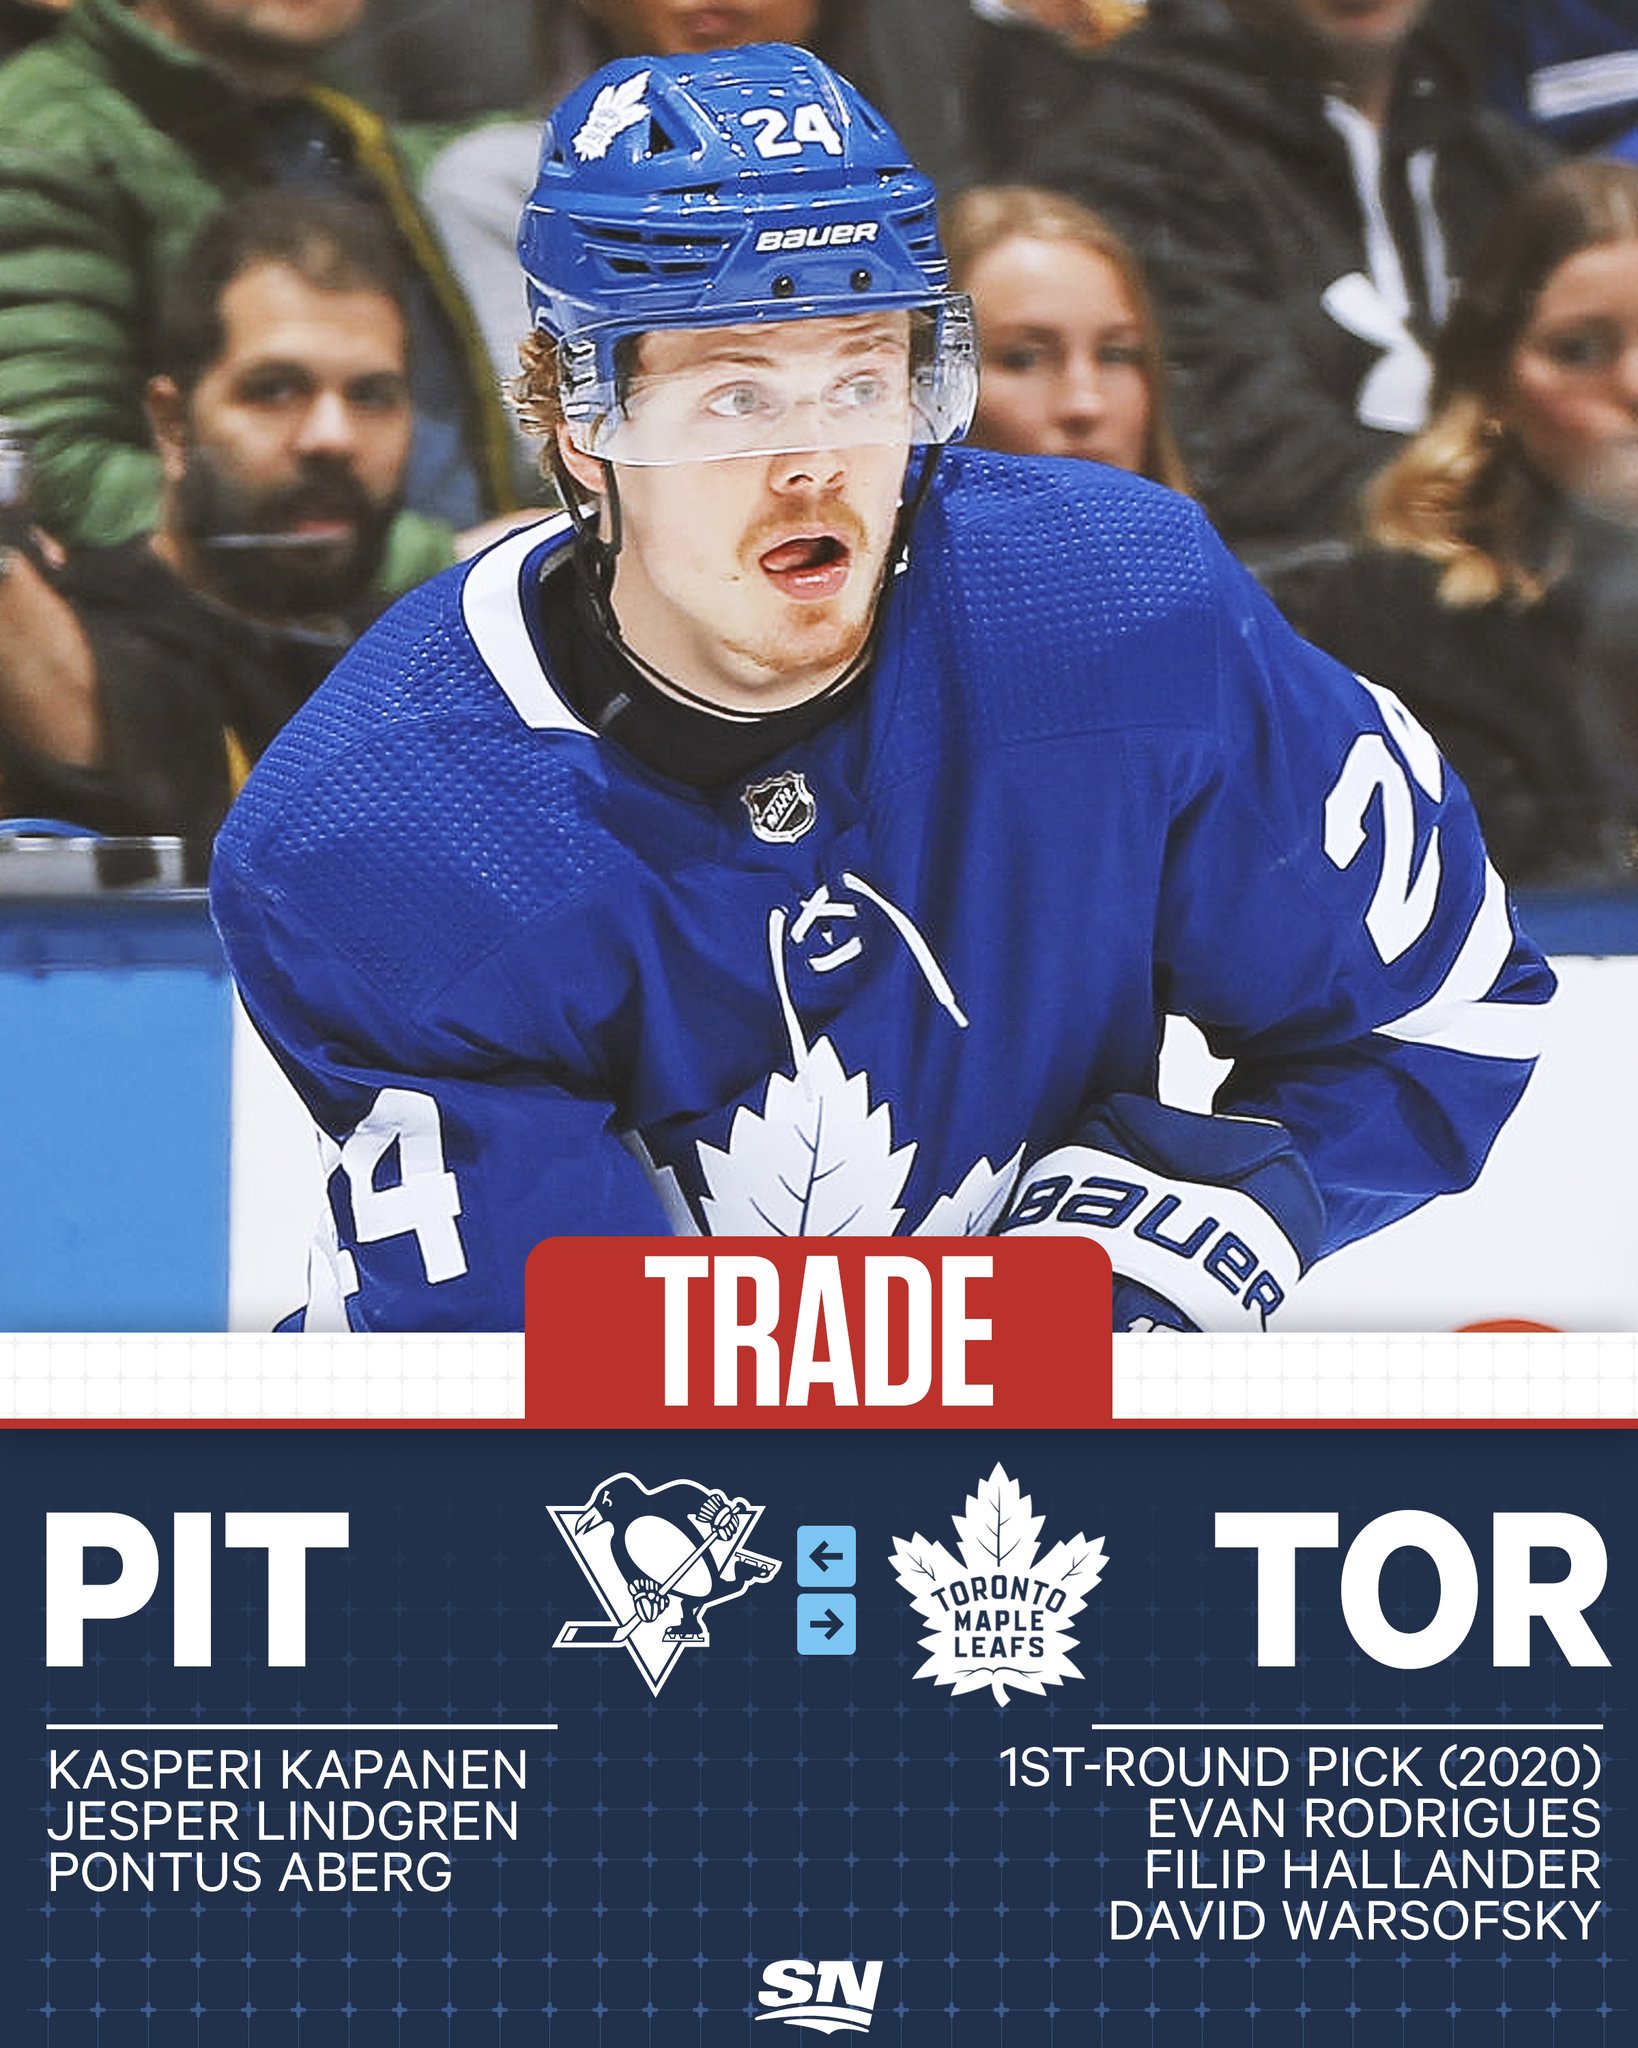 “.@MapleLeafs have traded Kasperi Kapanen in a package deal to the @penguin...